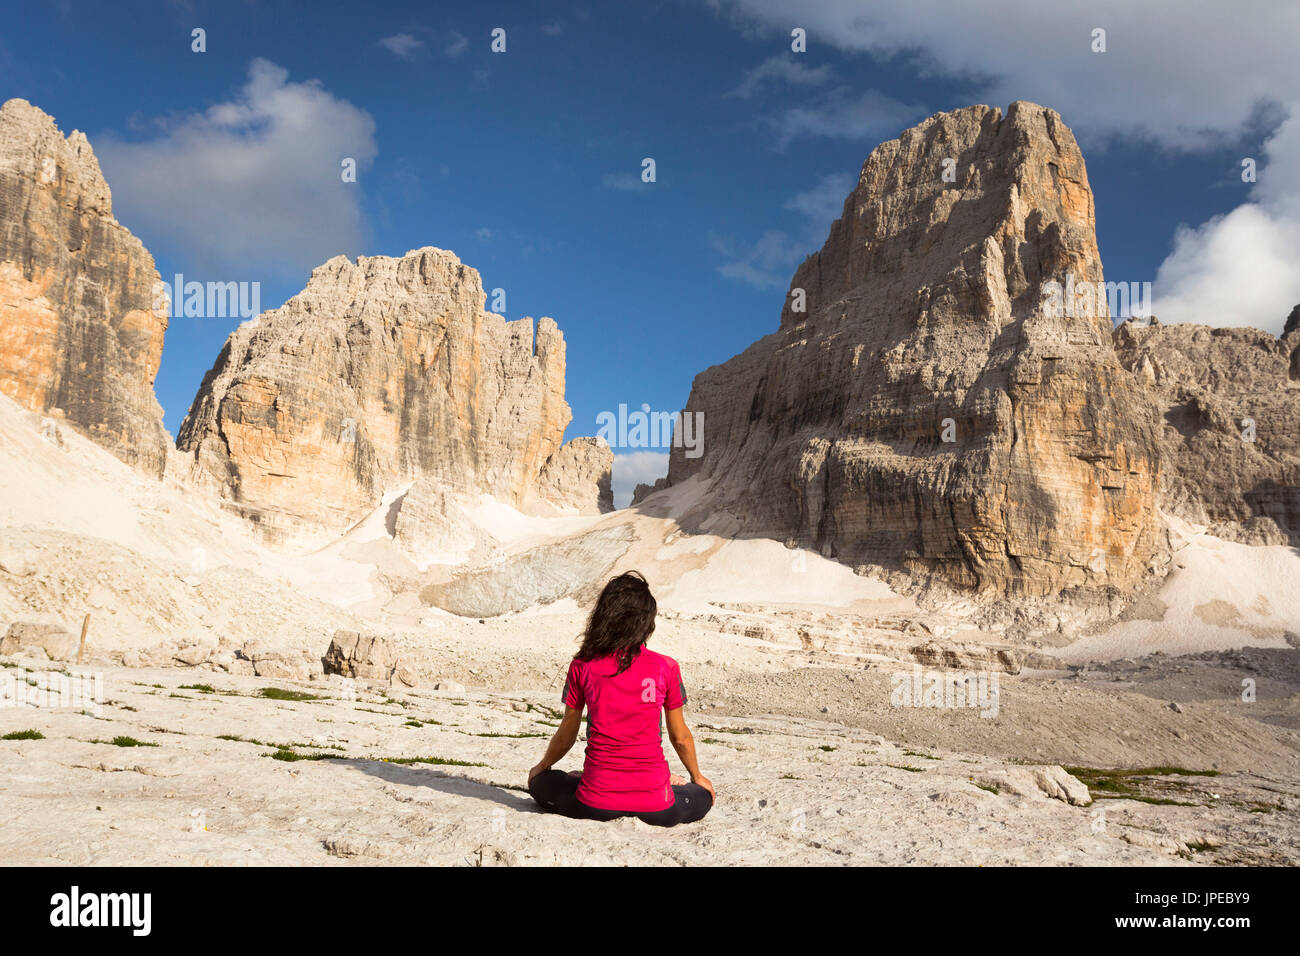 a new age image of a woman sitting in meditation in front of the moon with Brenta Group in the background, Trento province, Trentino Alto Adige, Italy, Europe Stock Photo